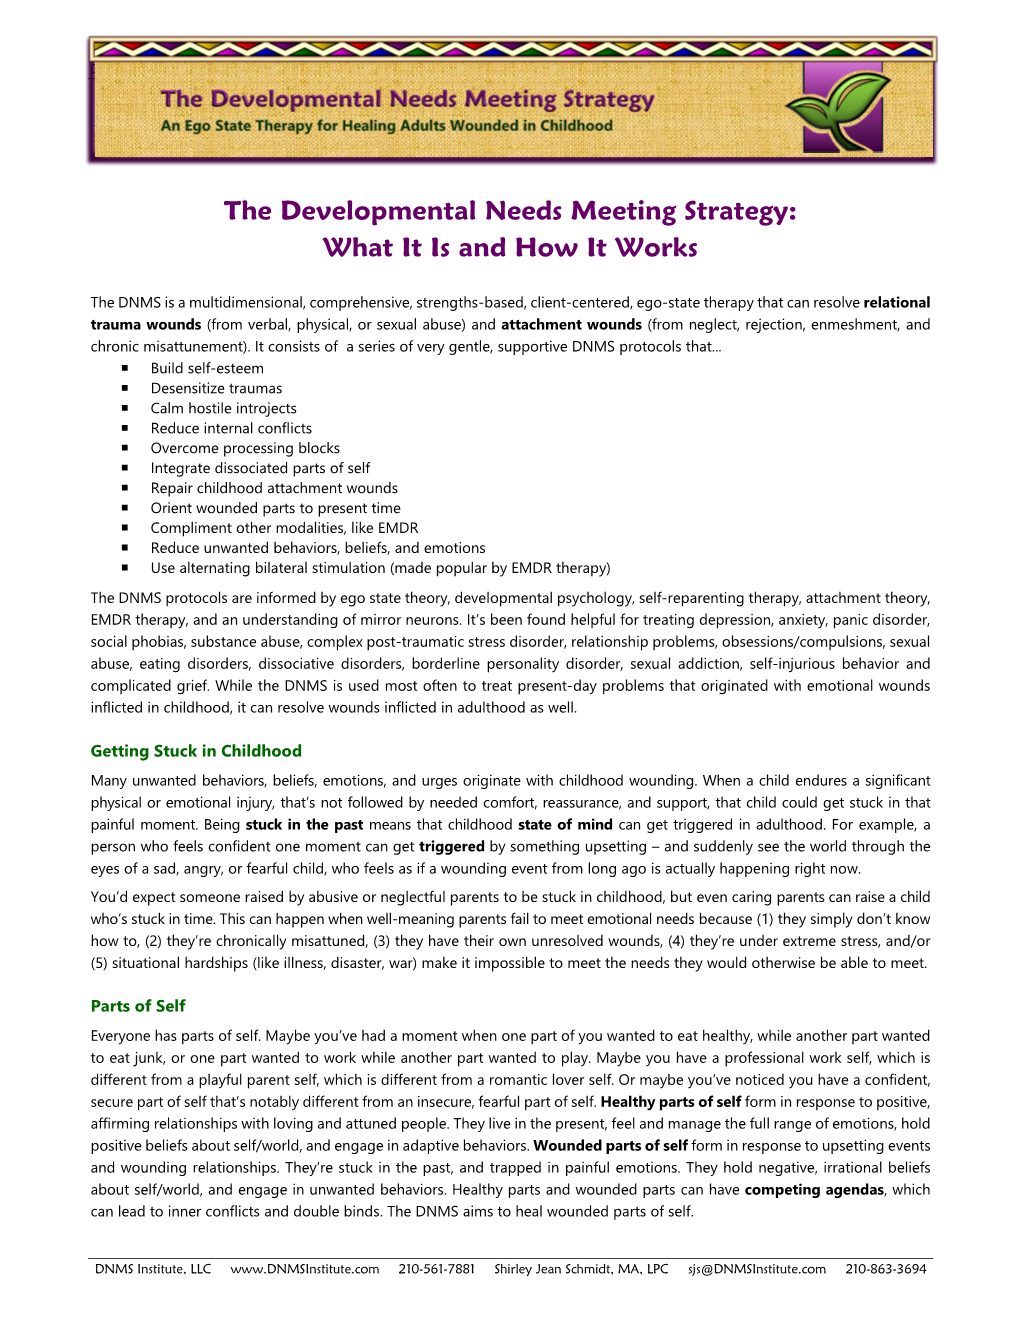 The Developmental Needs Meeting Strategy: What It Is and How It Works